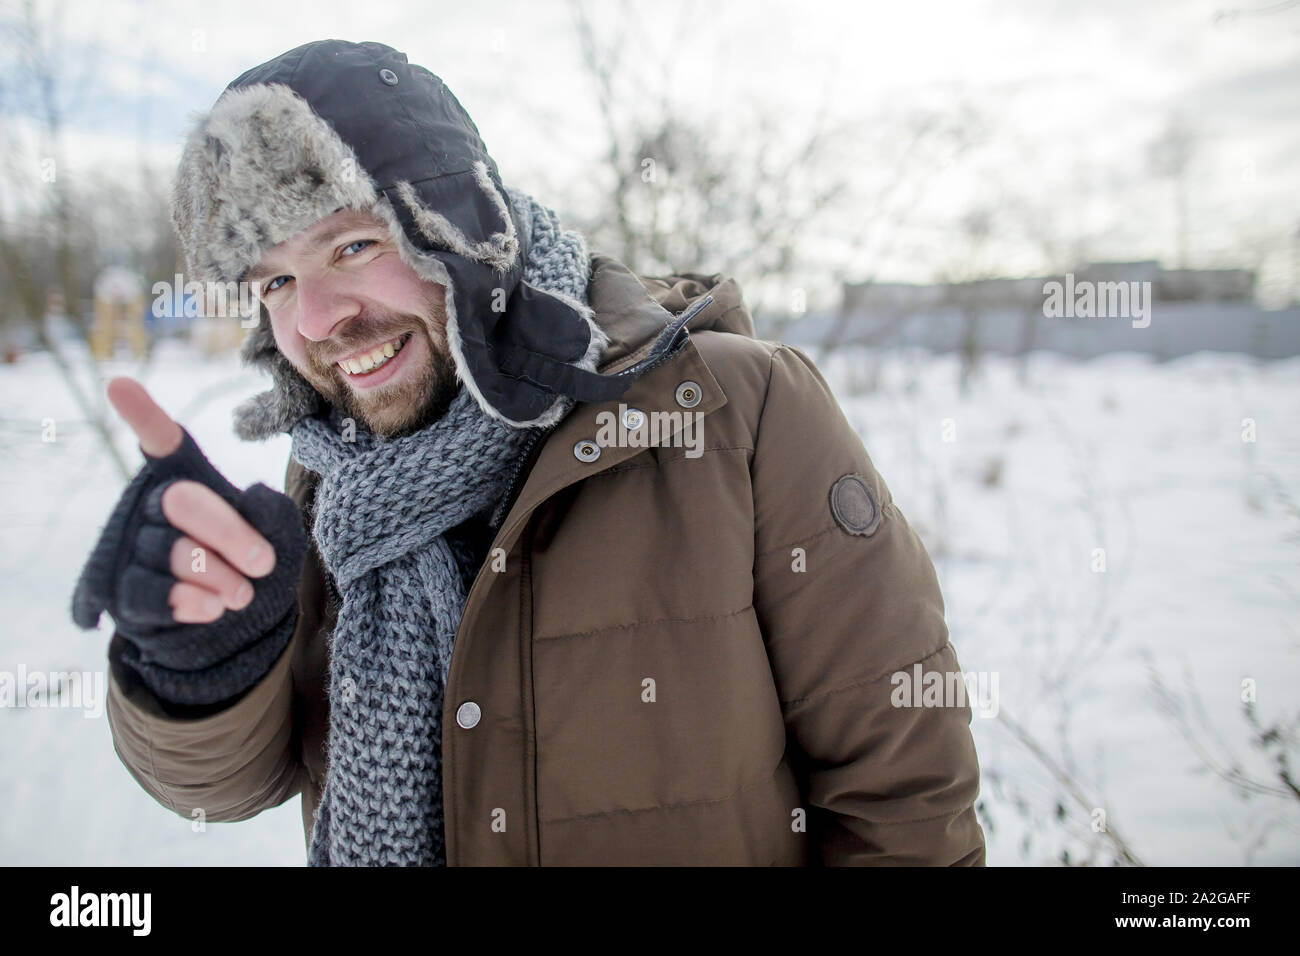 smiling man shows and explains the index finger in the winter outdoors in a fur hat and jacket Stock Photo